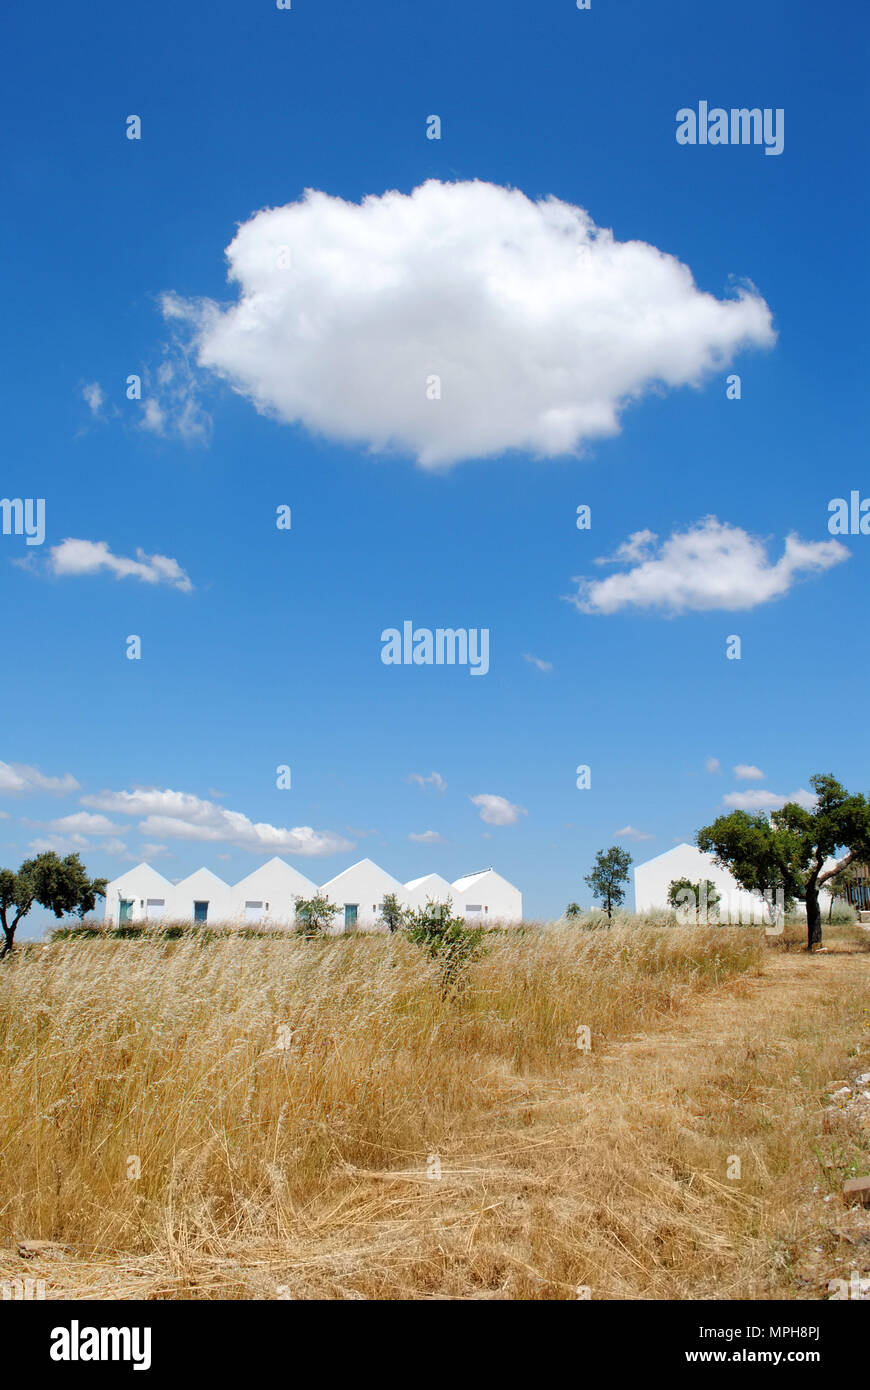 An example of the idyllic Alentejo countryside featuring a field with cork oaks and some modern white buildings. Stock Photo